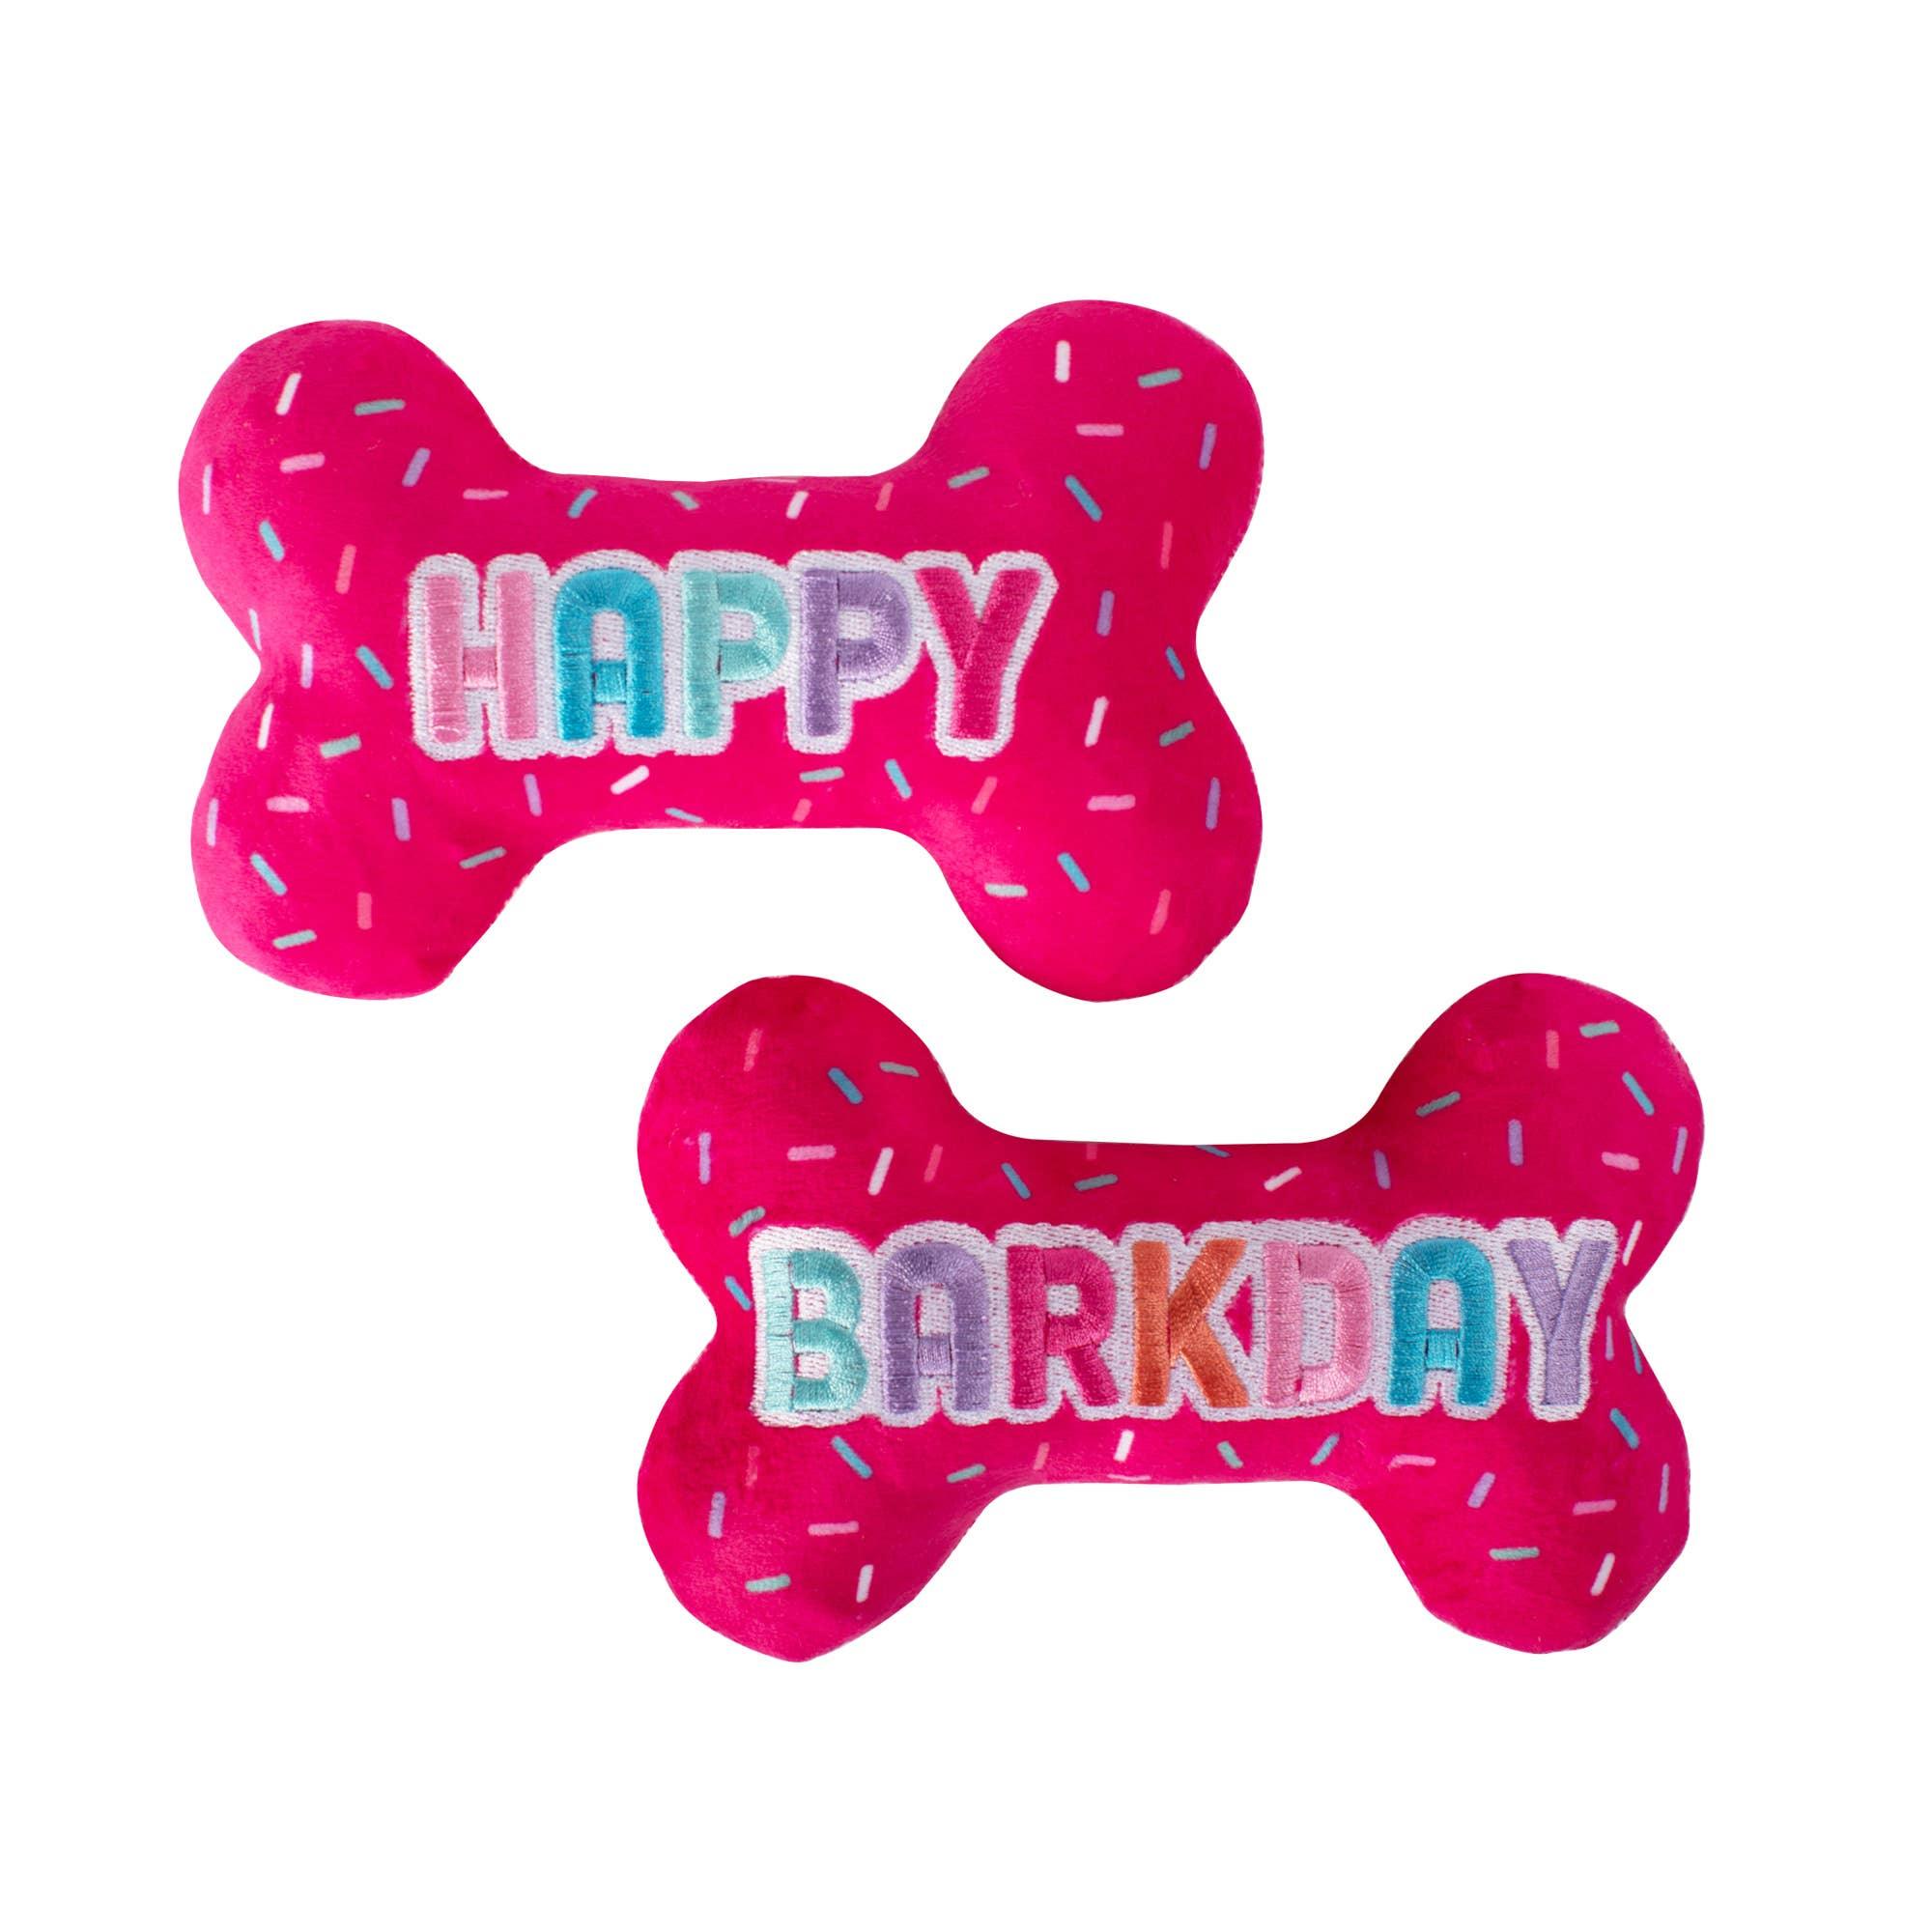 IT'S MY BARKDAY - Rocky & Maggie's Pet Boutique and Salon